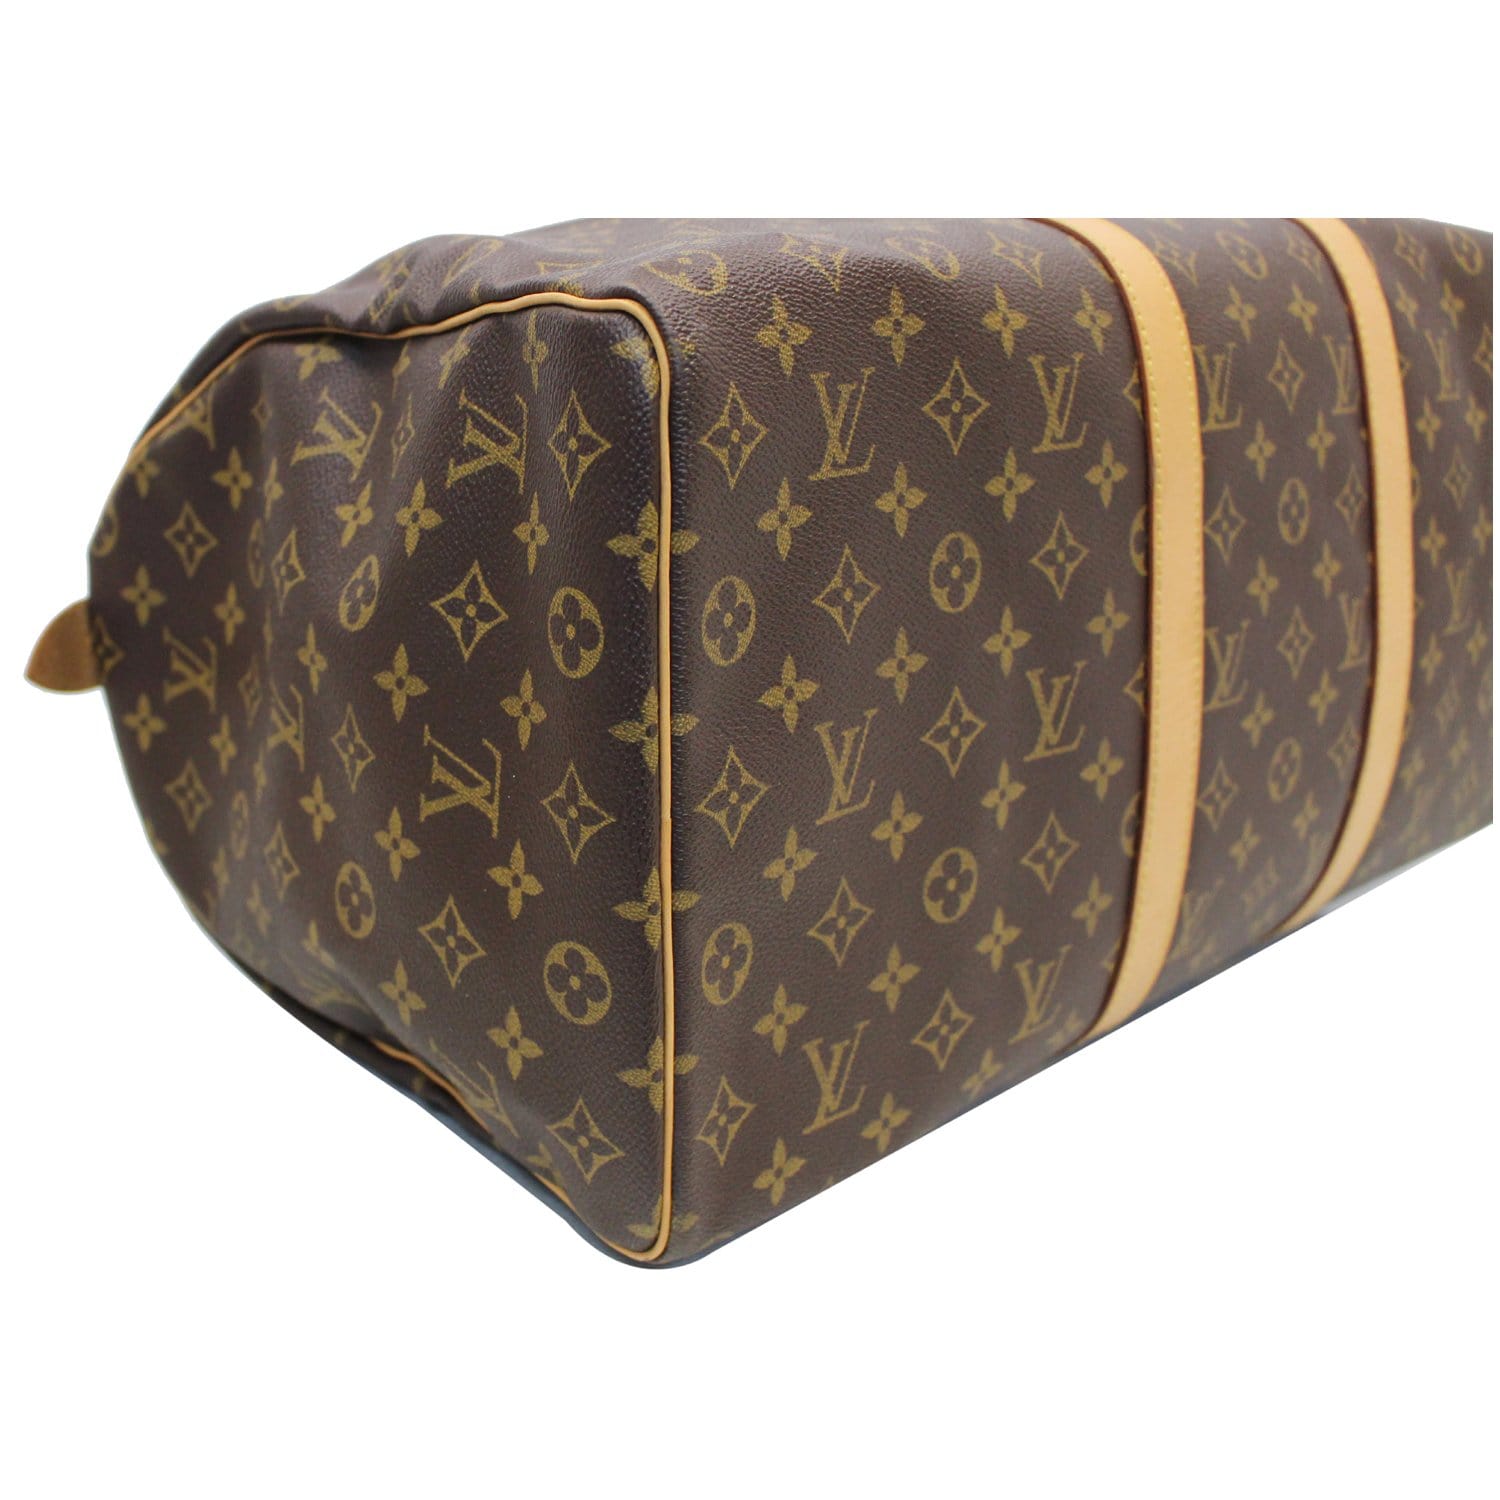 Lv Keepall 50 Price  Natural Resource Department